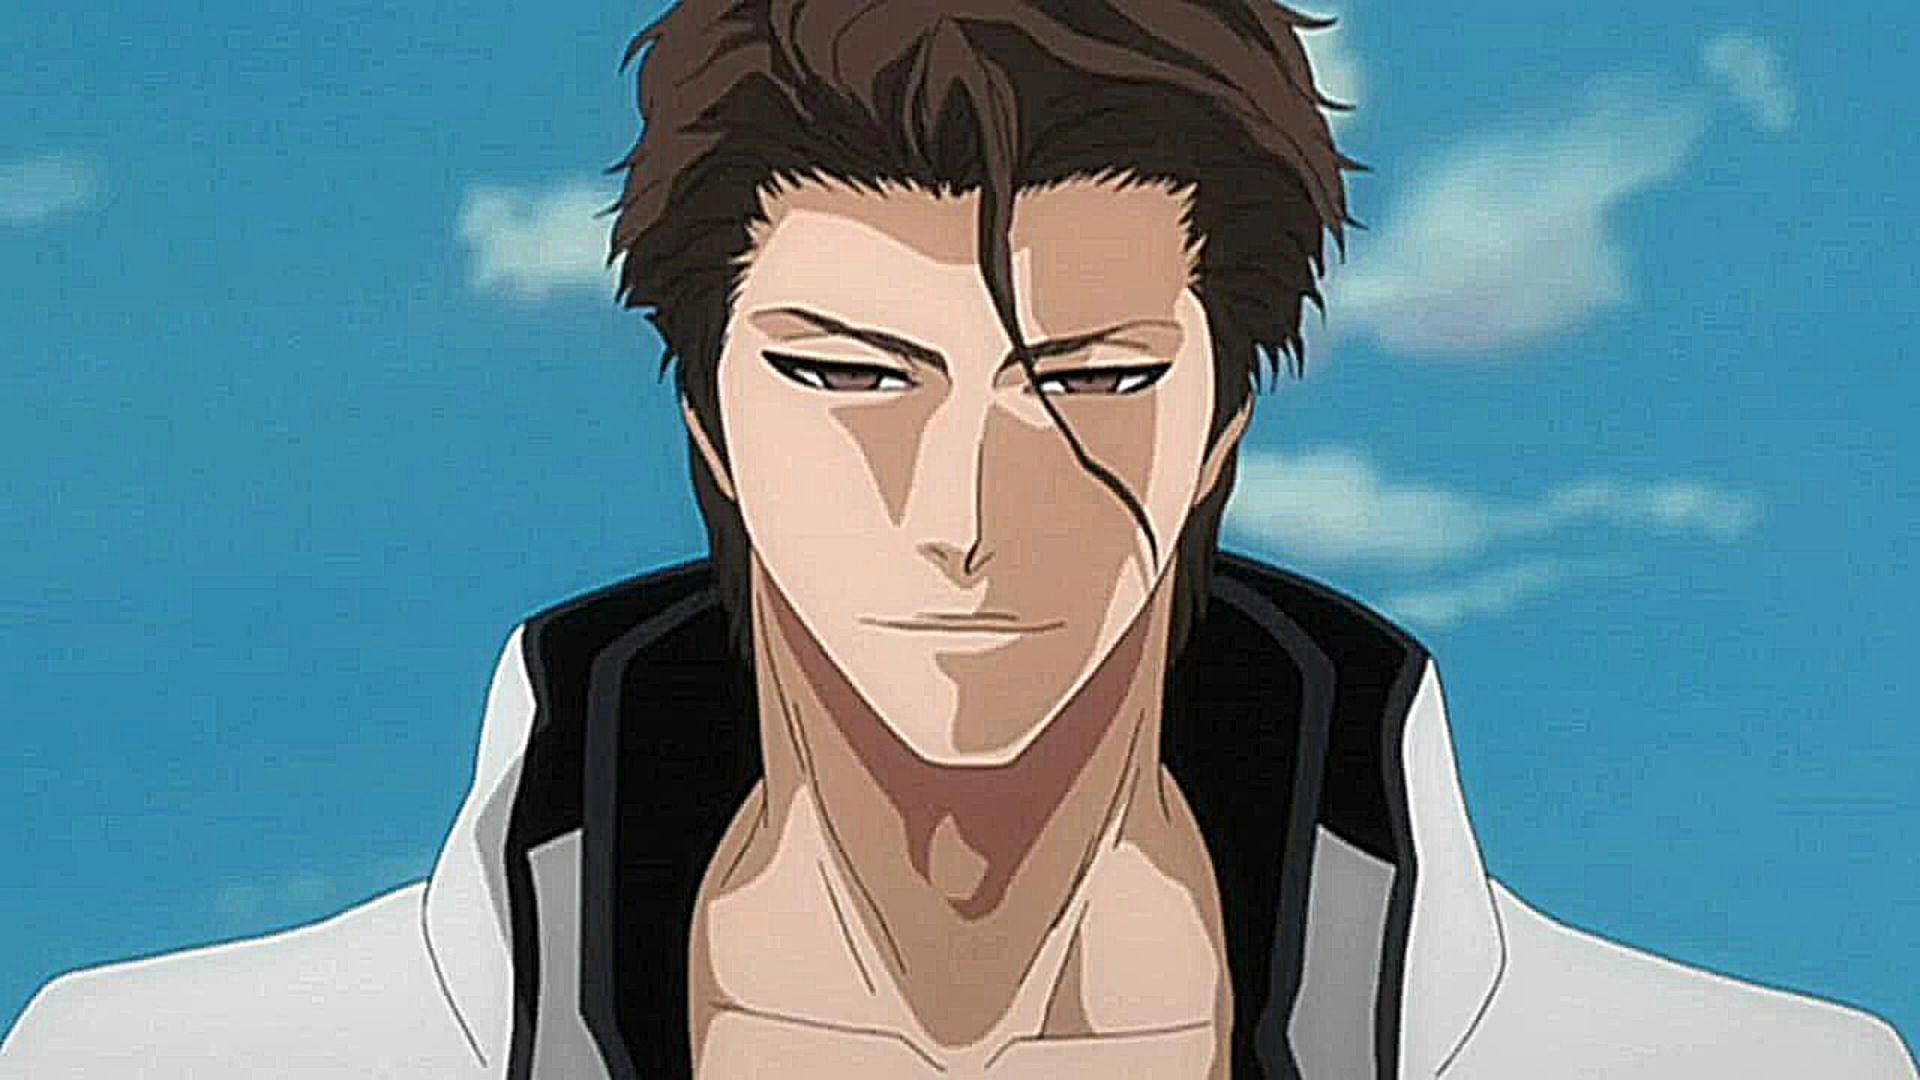 Sosuke Aizen as seen during his fight against the Gotei 13 in Bleach anime (Image via Studio Pierrot)